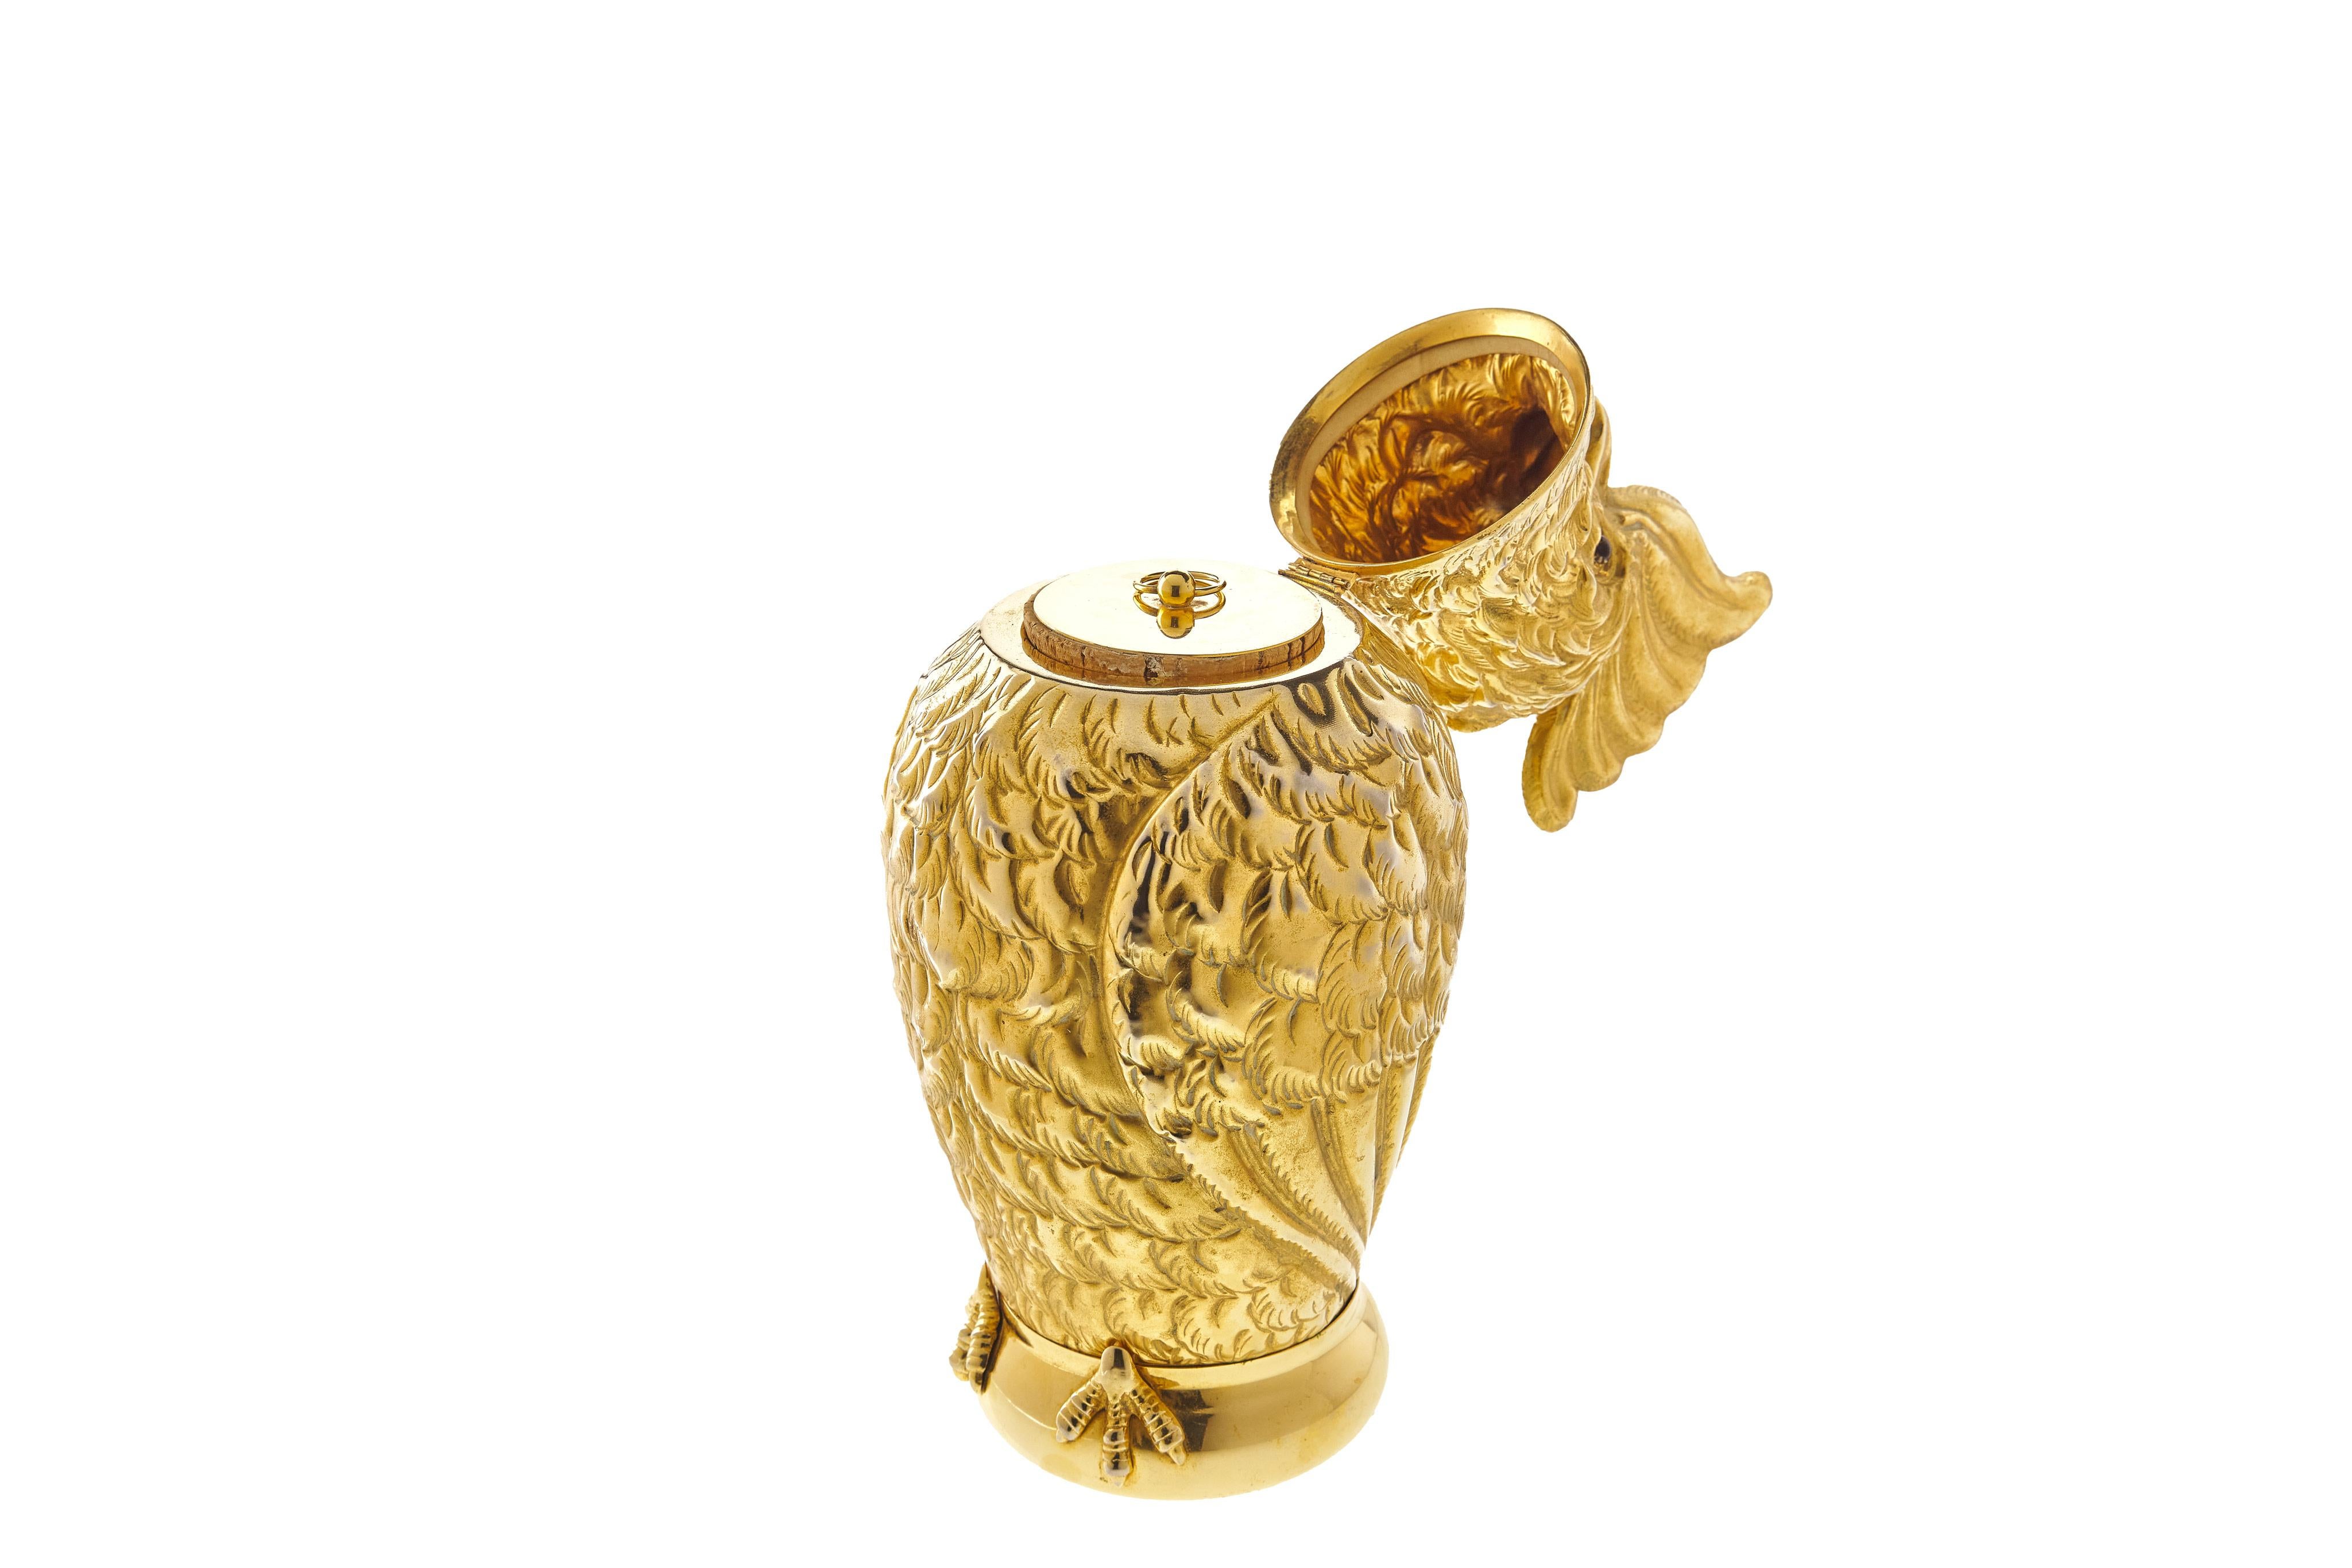 A rare figural cockatoo humidor by Mark Cross, in a gilt-metal. Featuring glass eyes and cork seal